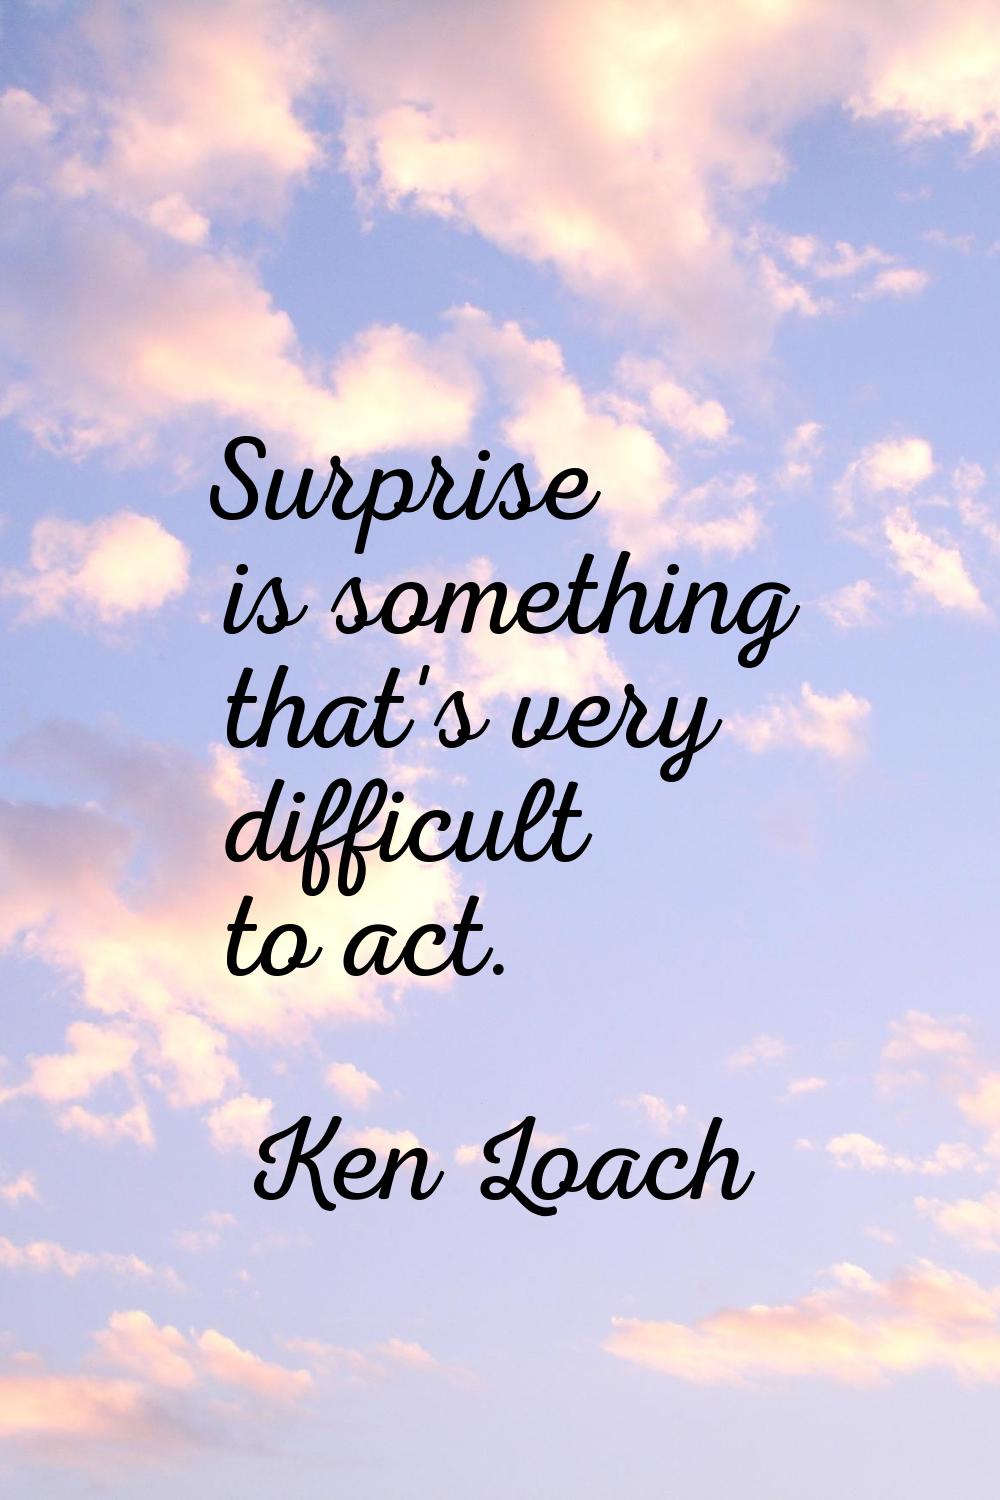 Surprise is something that's very difficult to act.